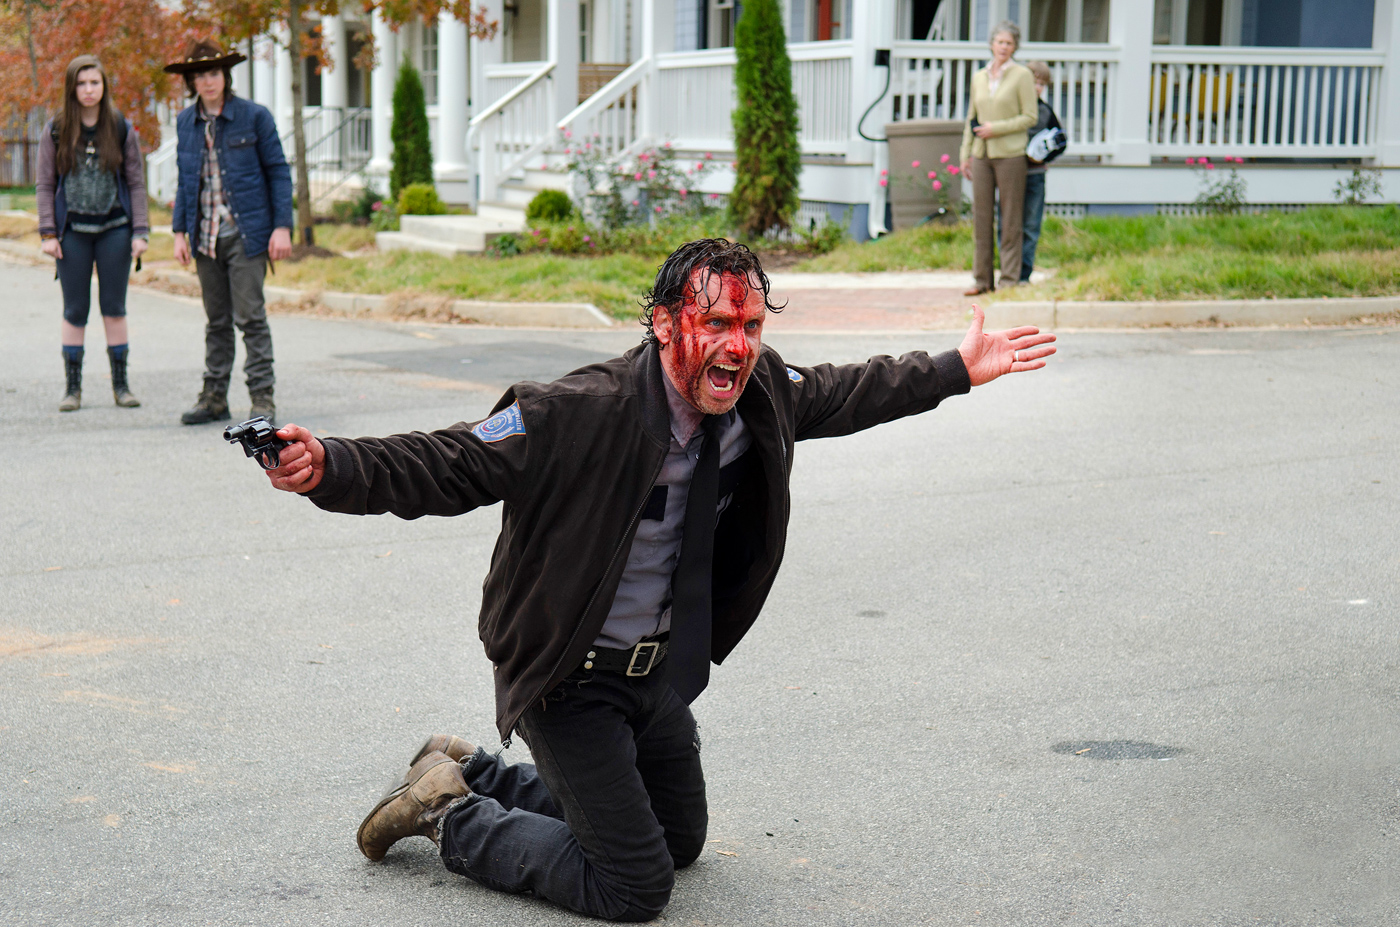  filled reaction and recap of The Walking Dead Season 5 Episode 15